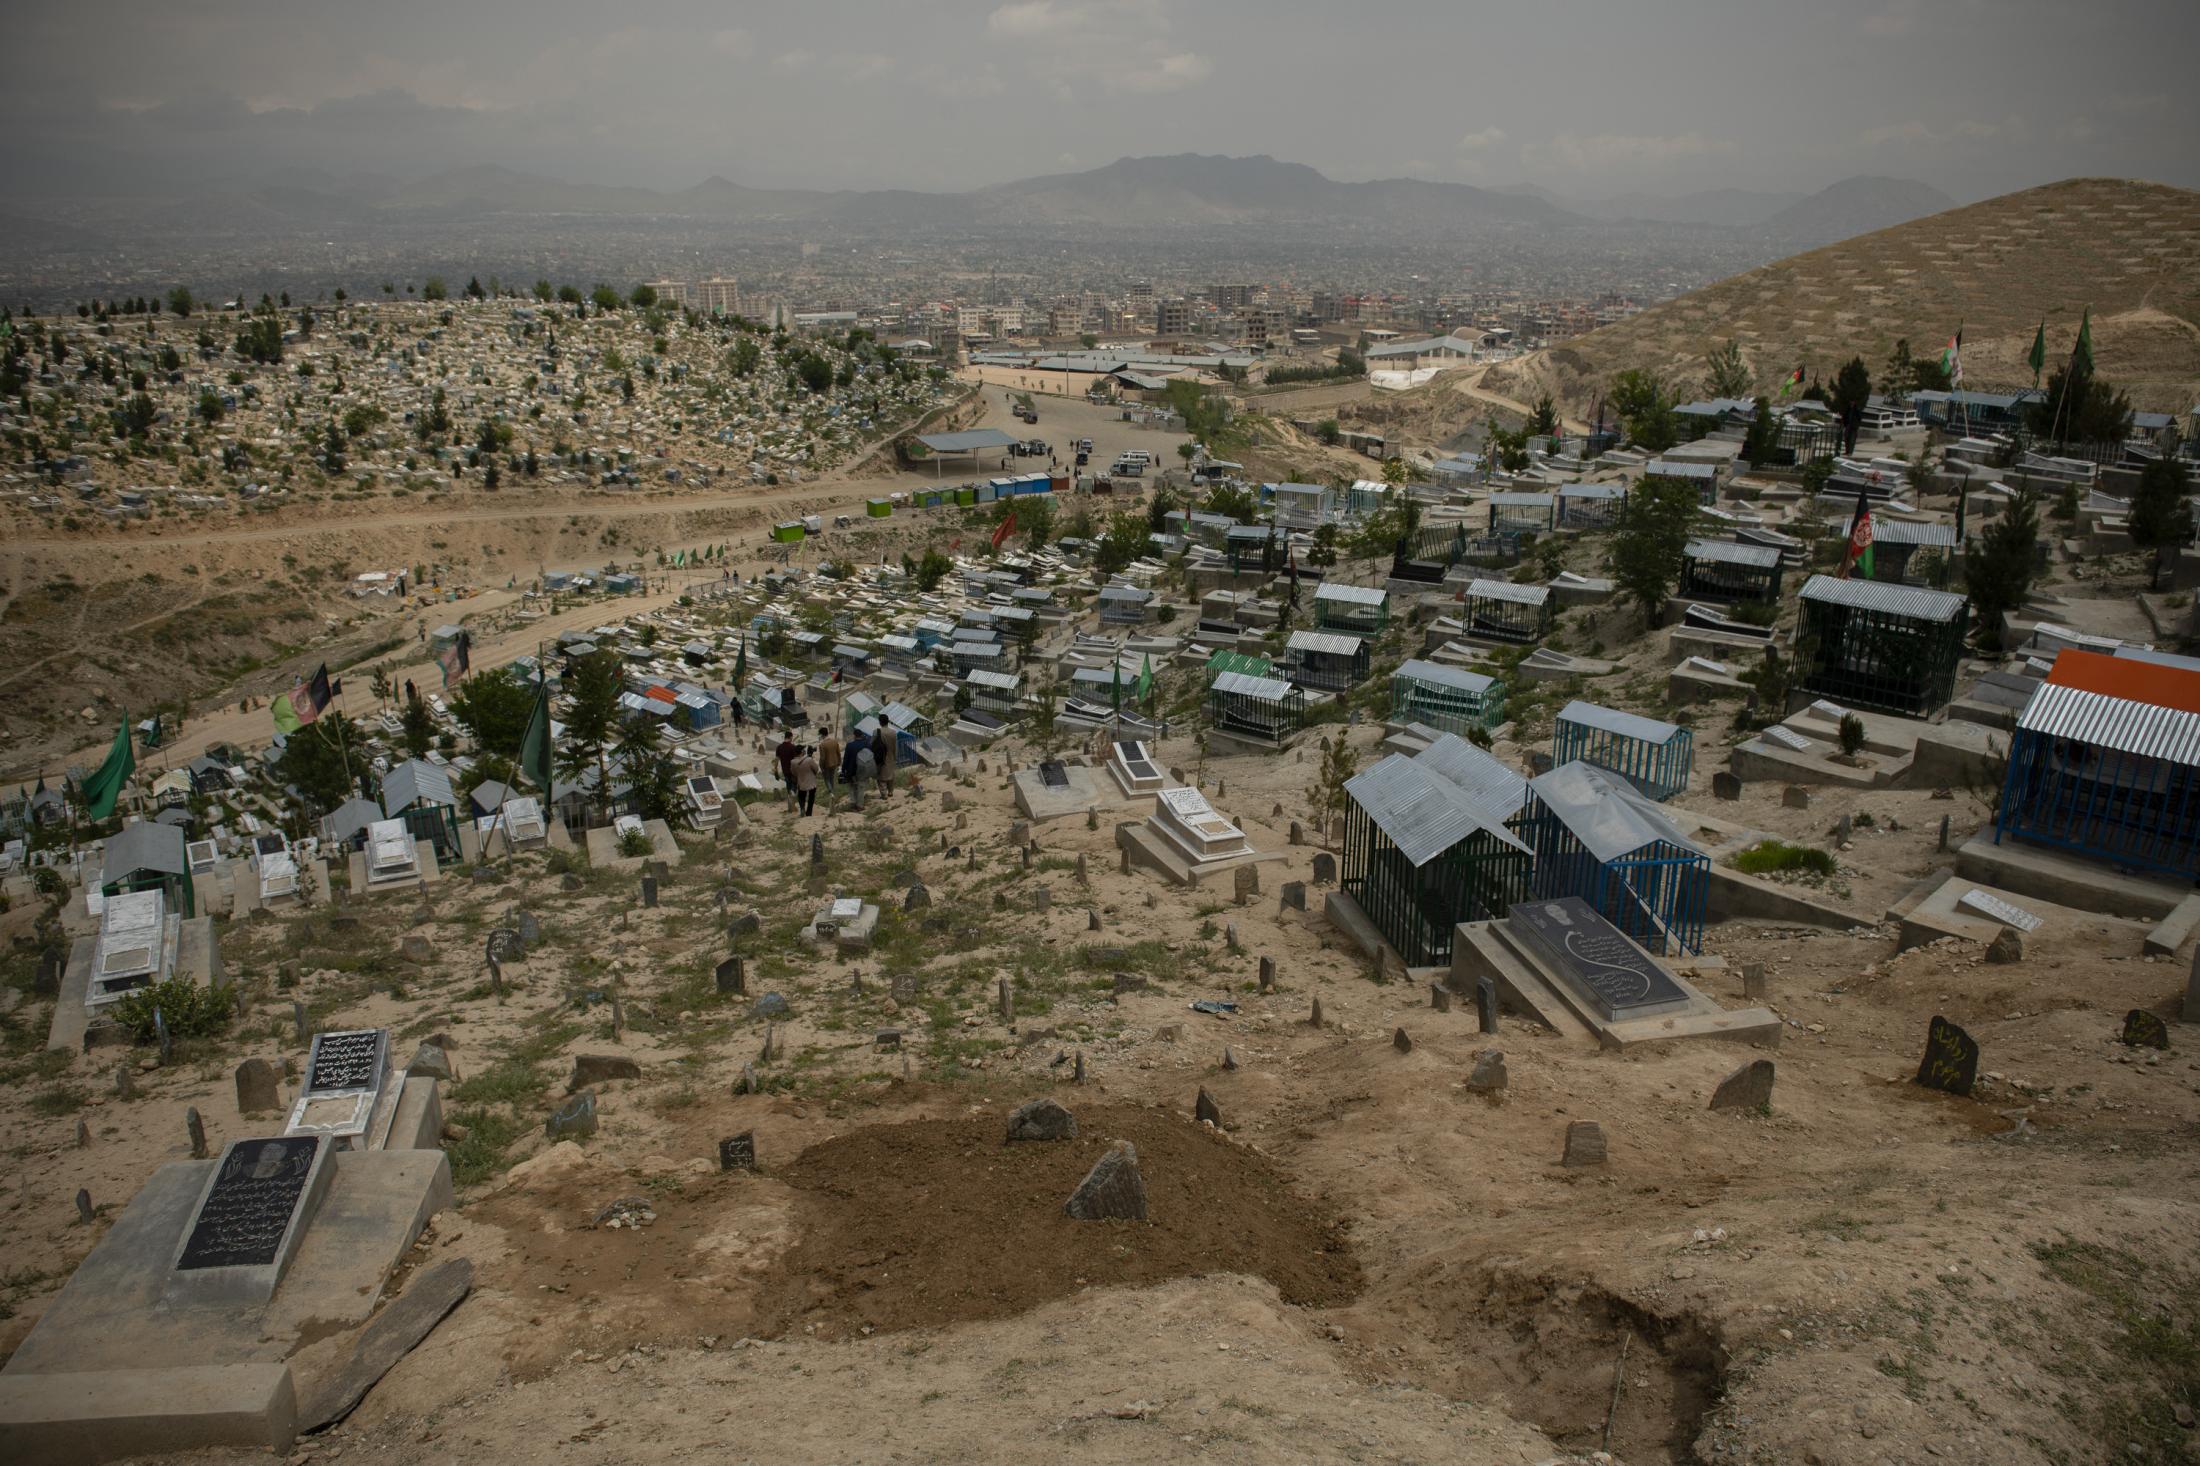 KABUL | KABUL | AFGHANISTAN | 5/13/20 | The newly dug grave where Hajar and her baby were buried earlier that morning, stands on top of a hill in a...